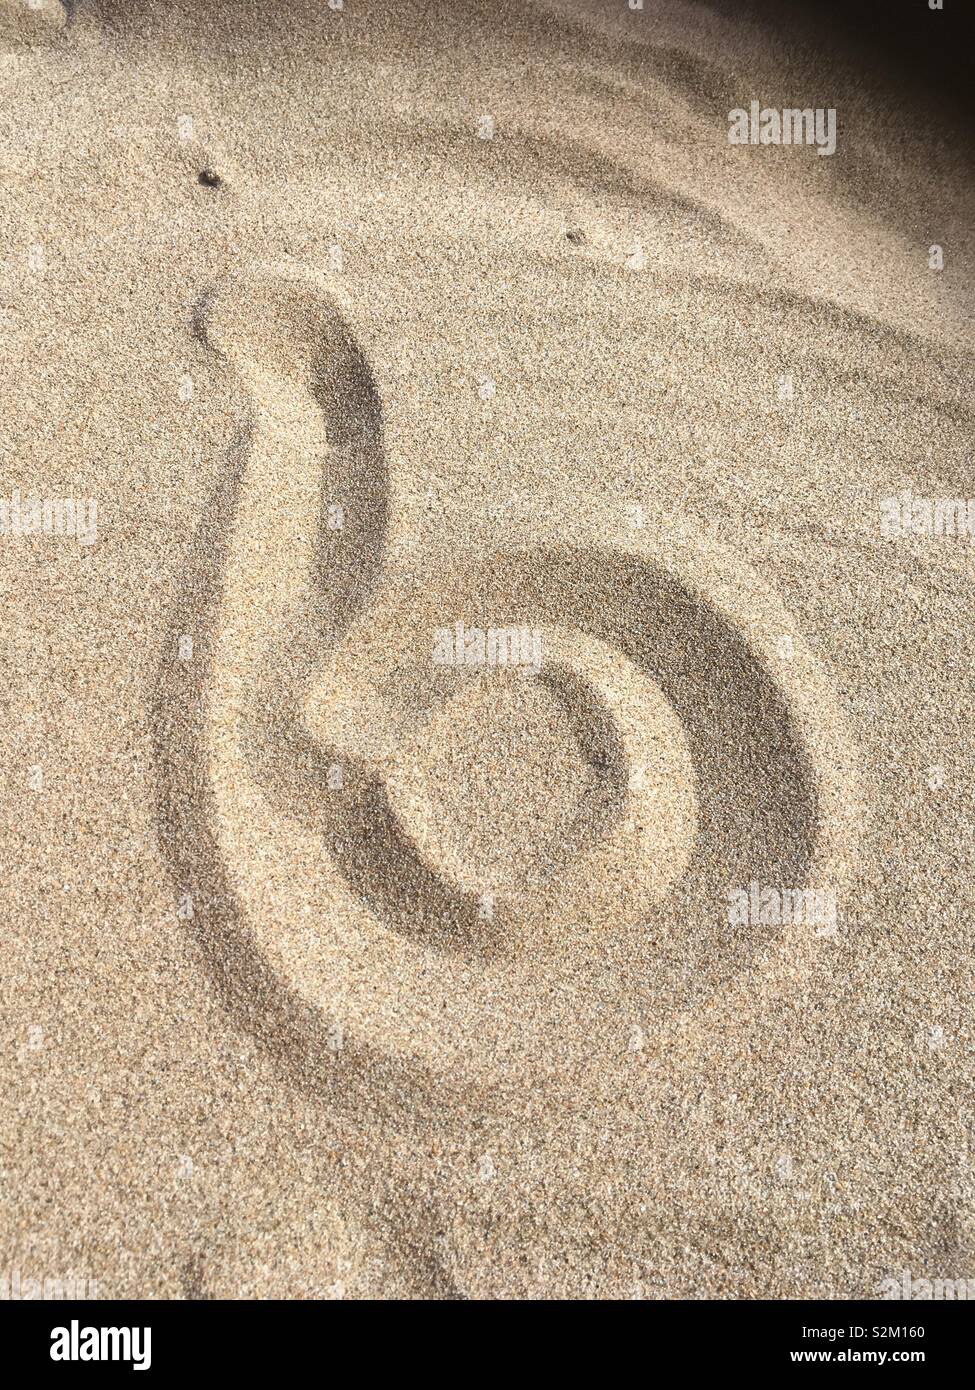 Small letter ‘b’ written in sand Stock Photo